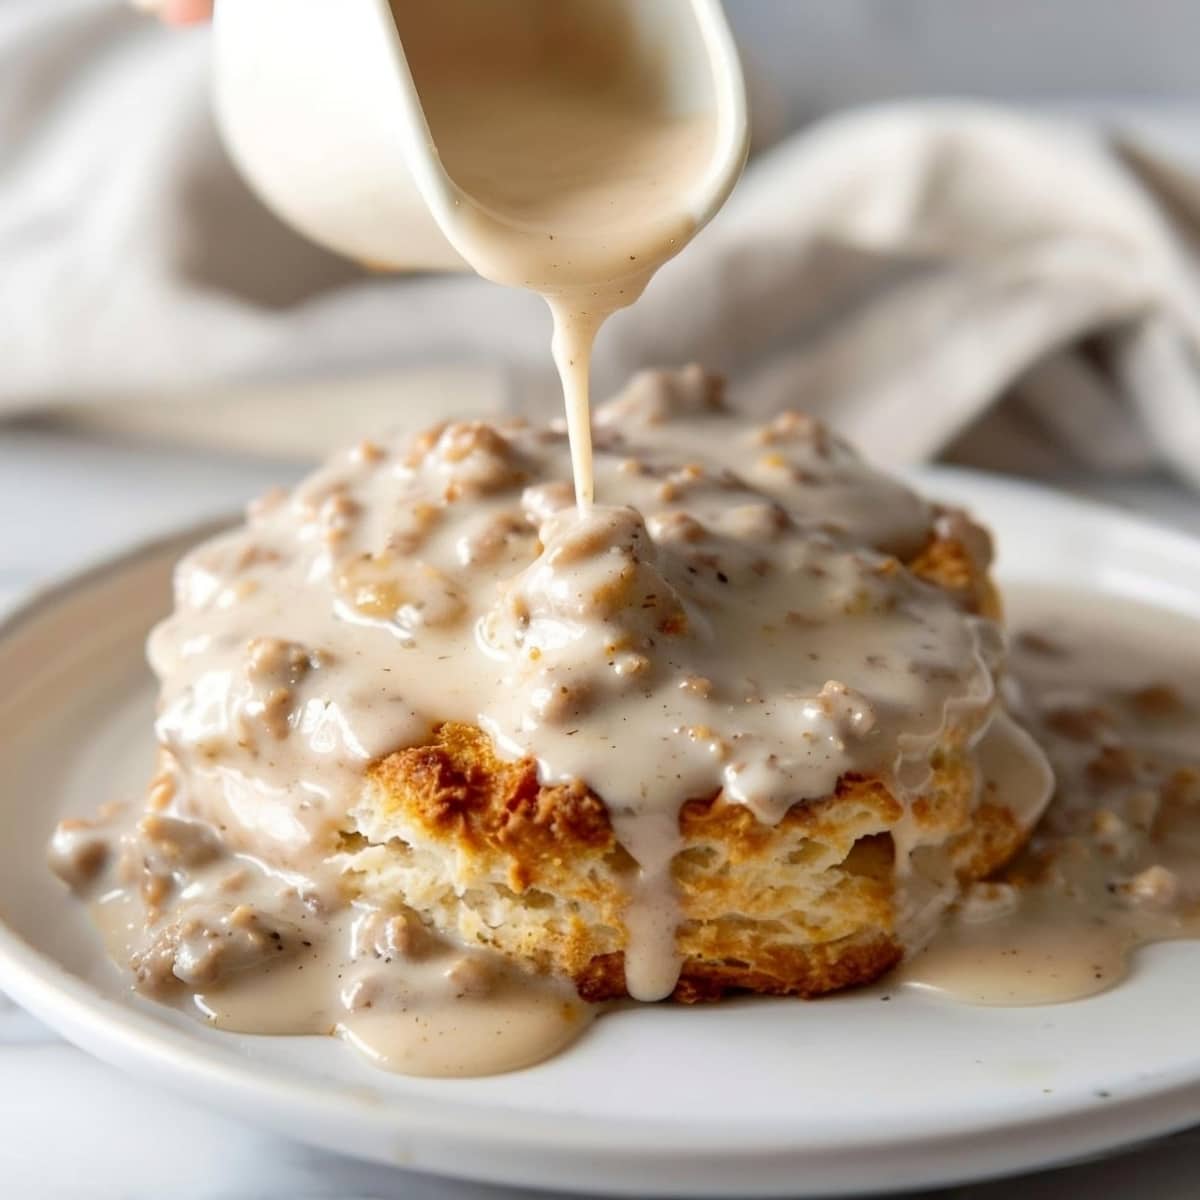 Southern biscuits with creamy gravy, a classic comfort food dish